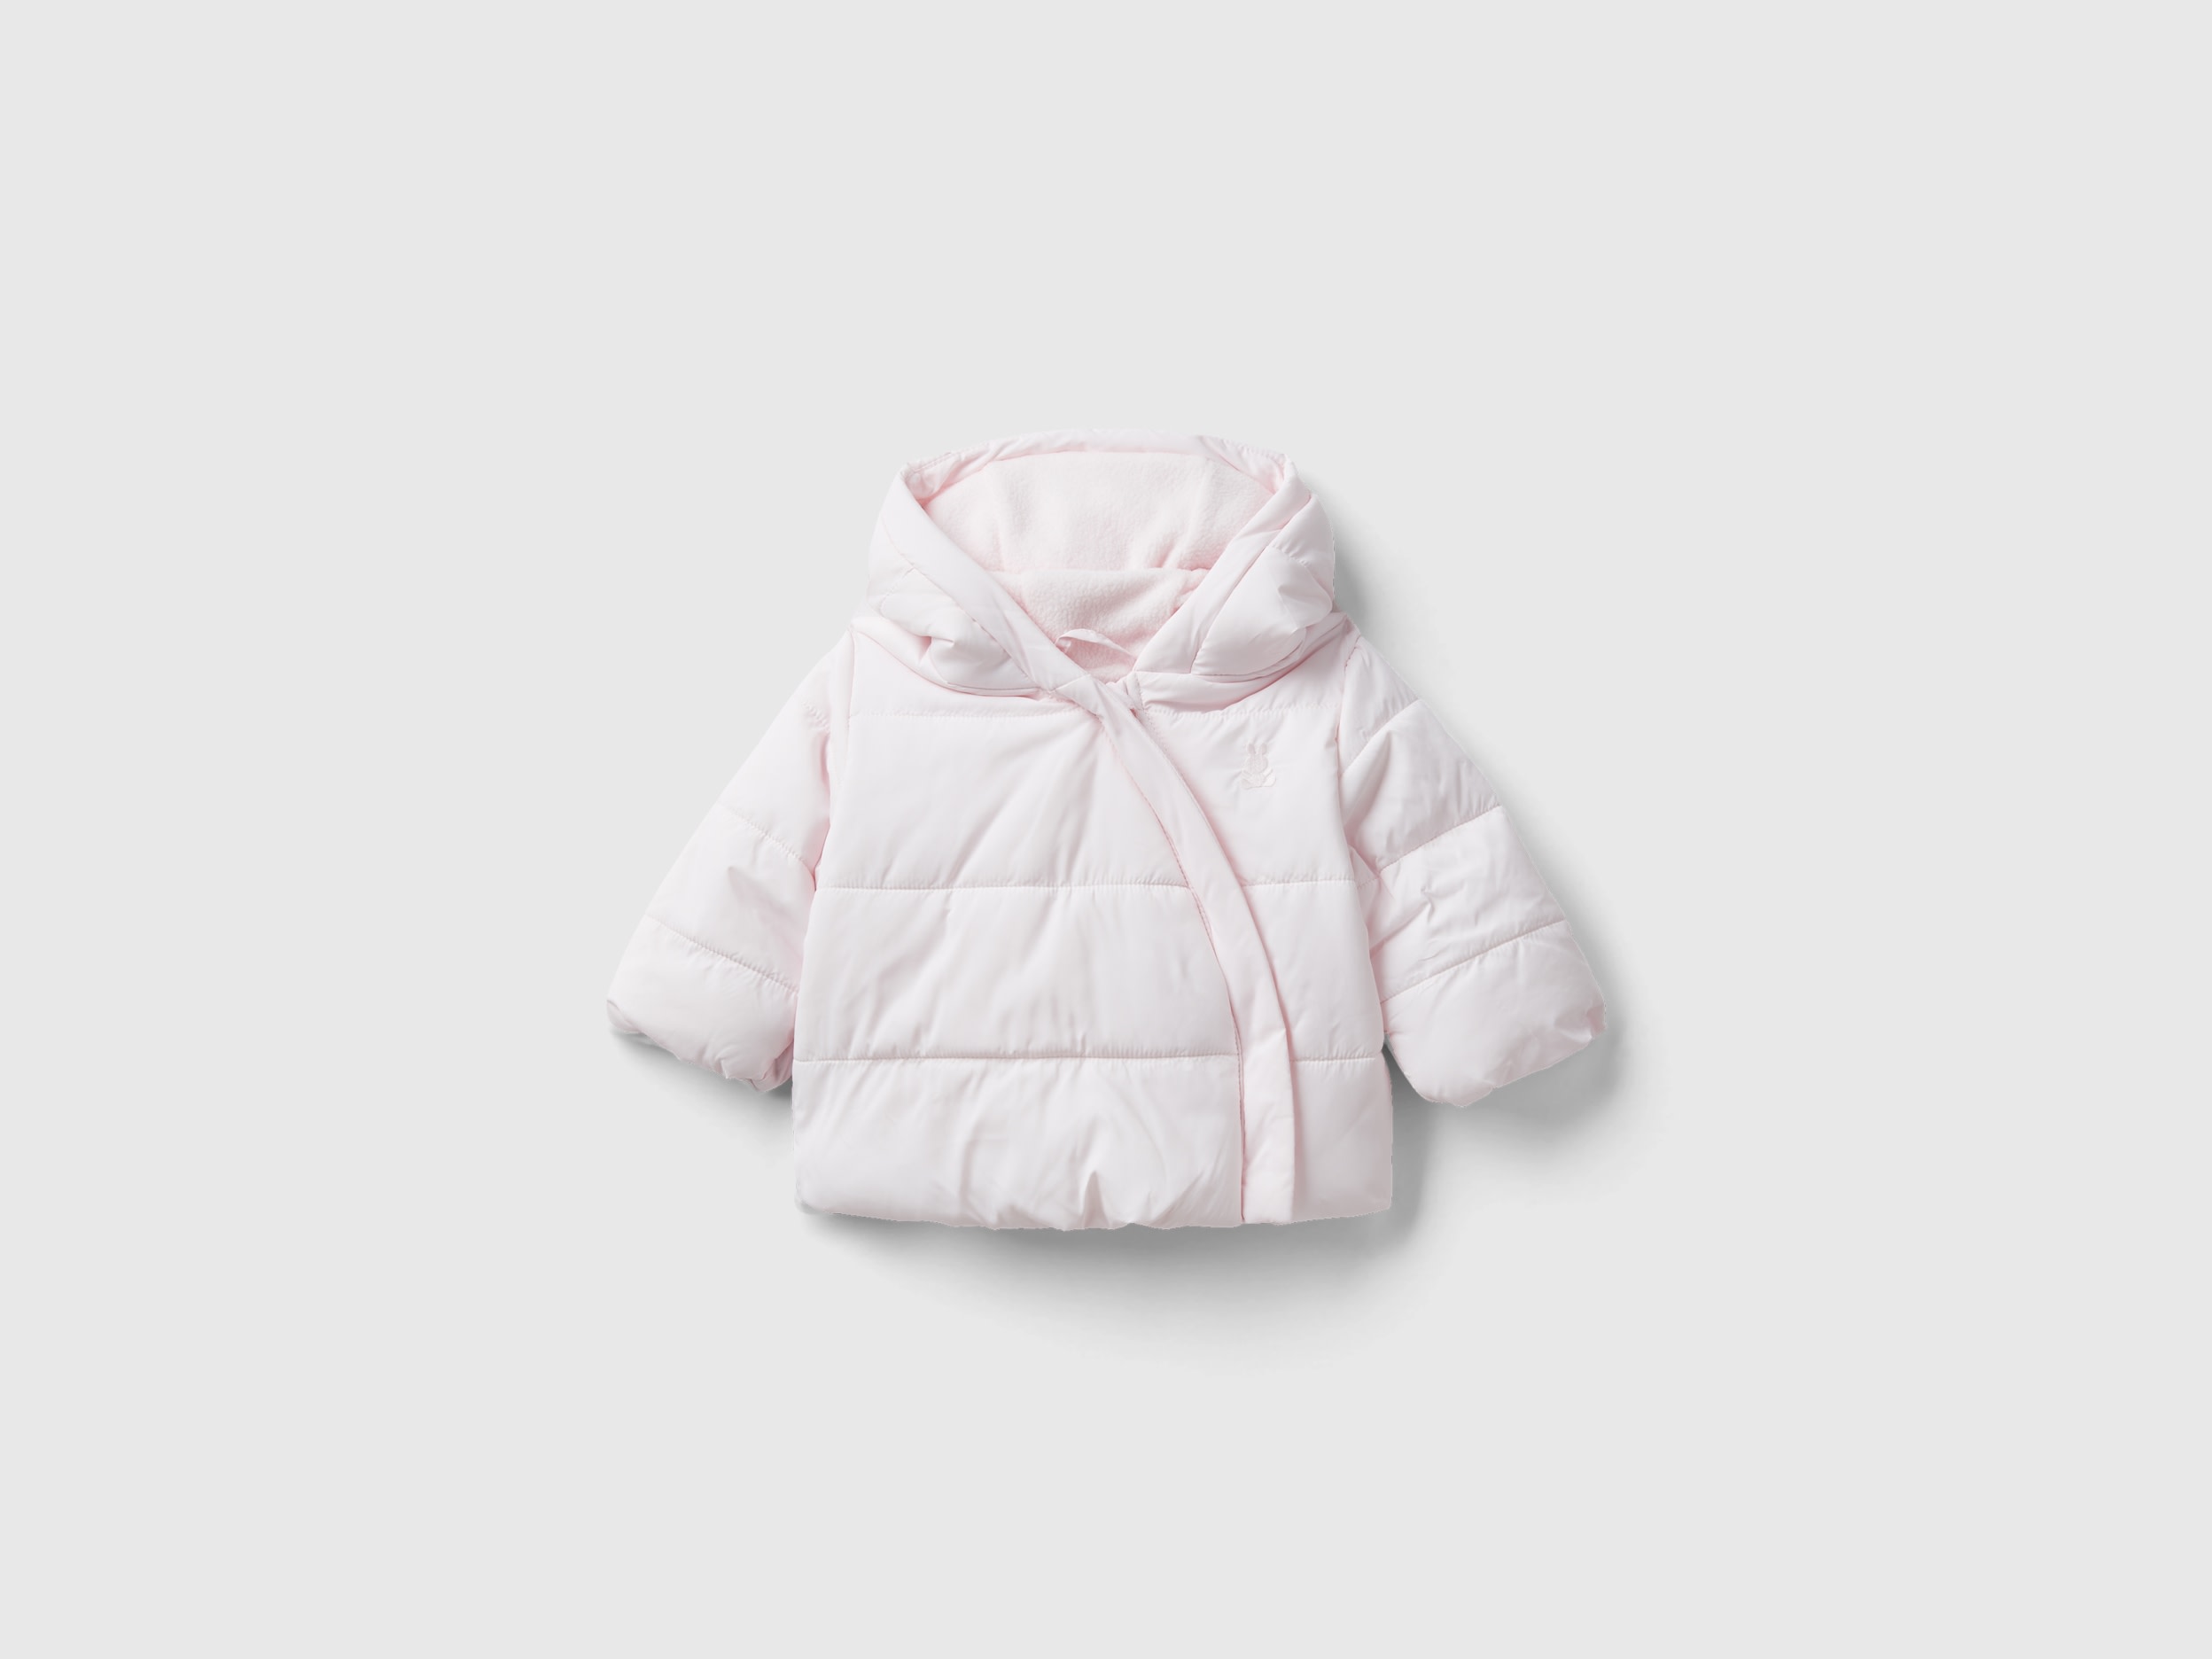 Benetton, Padded Jacket With Hood, size 12-18, Soft Pink, Kids